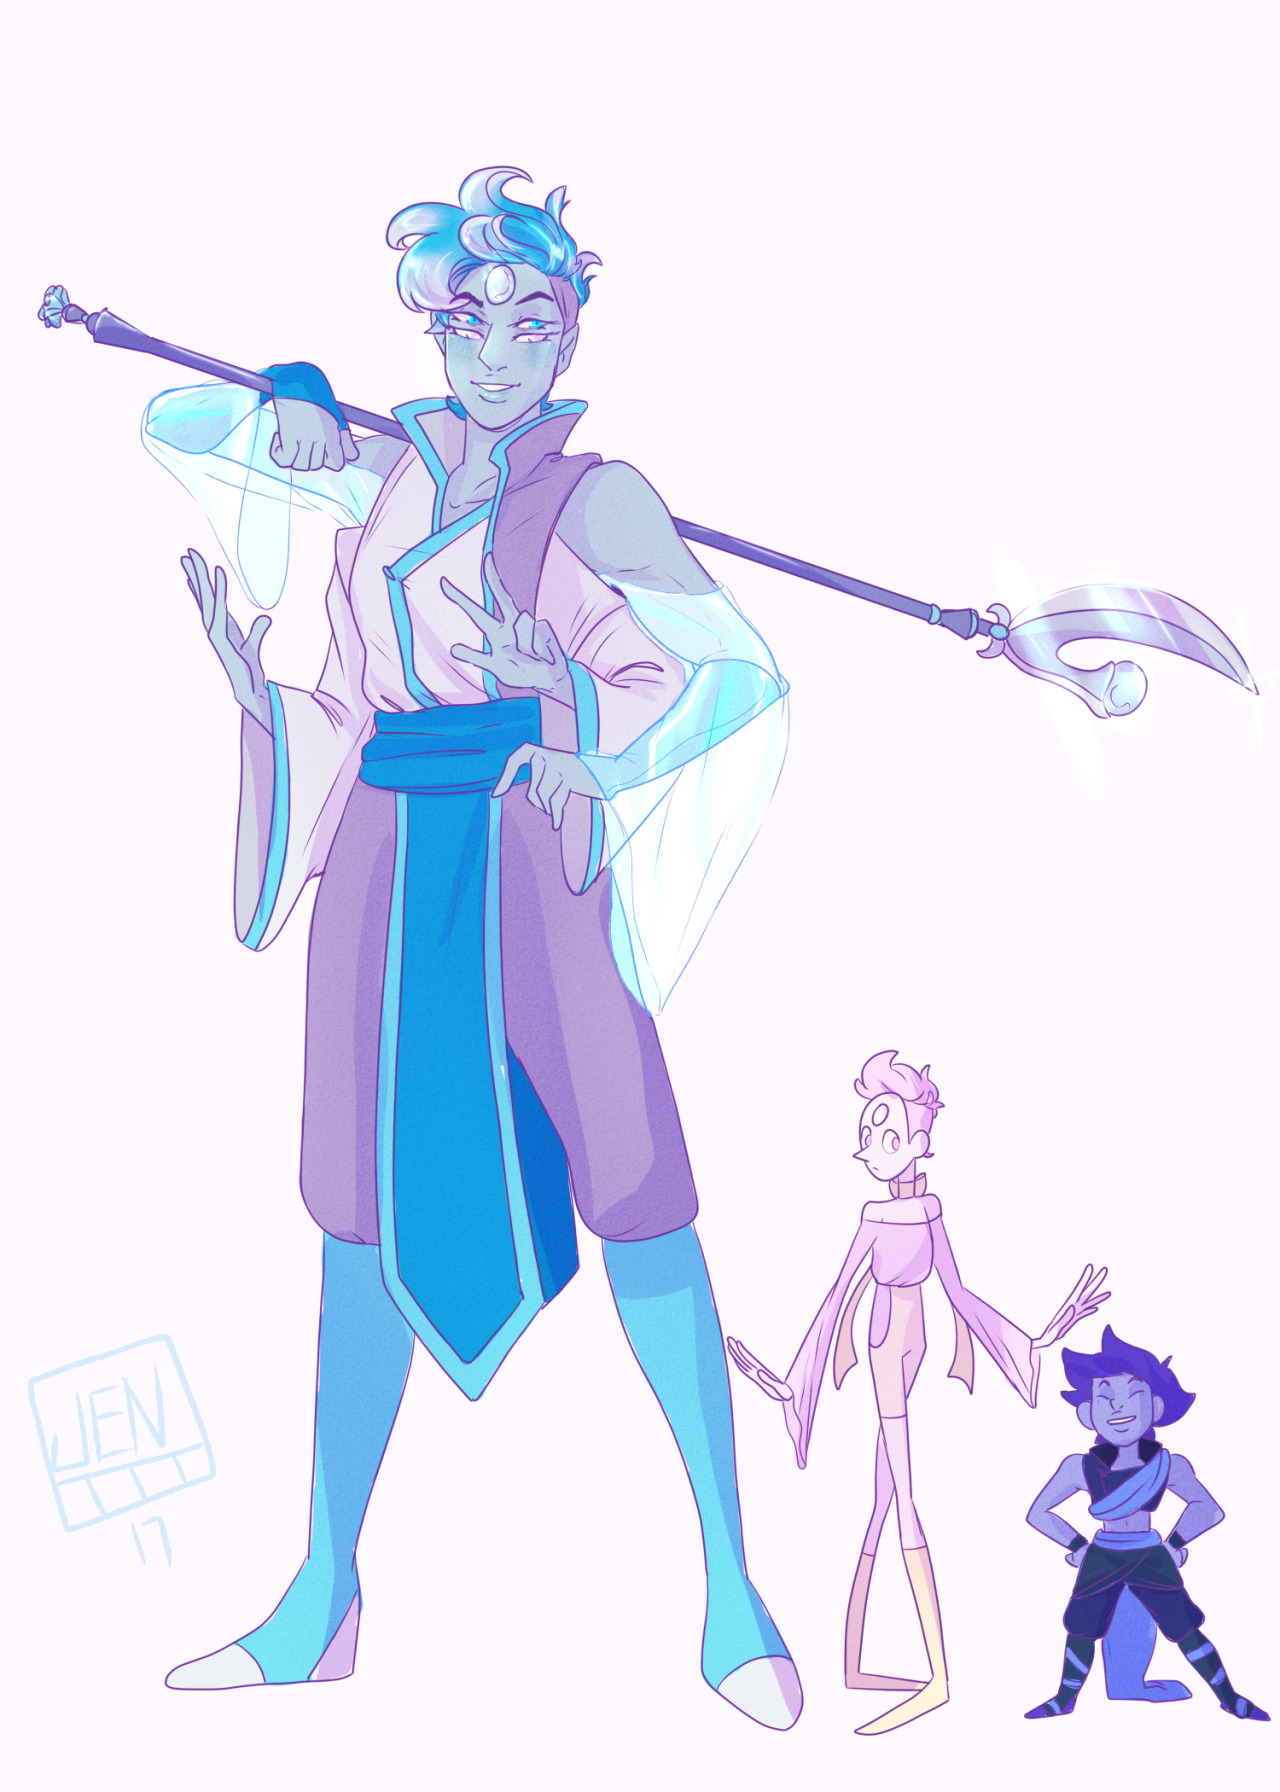 Introducing, Larimar! The fusion between my Gemsona Hauyne (Right) and @l-sula-l‘s